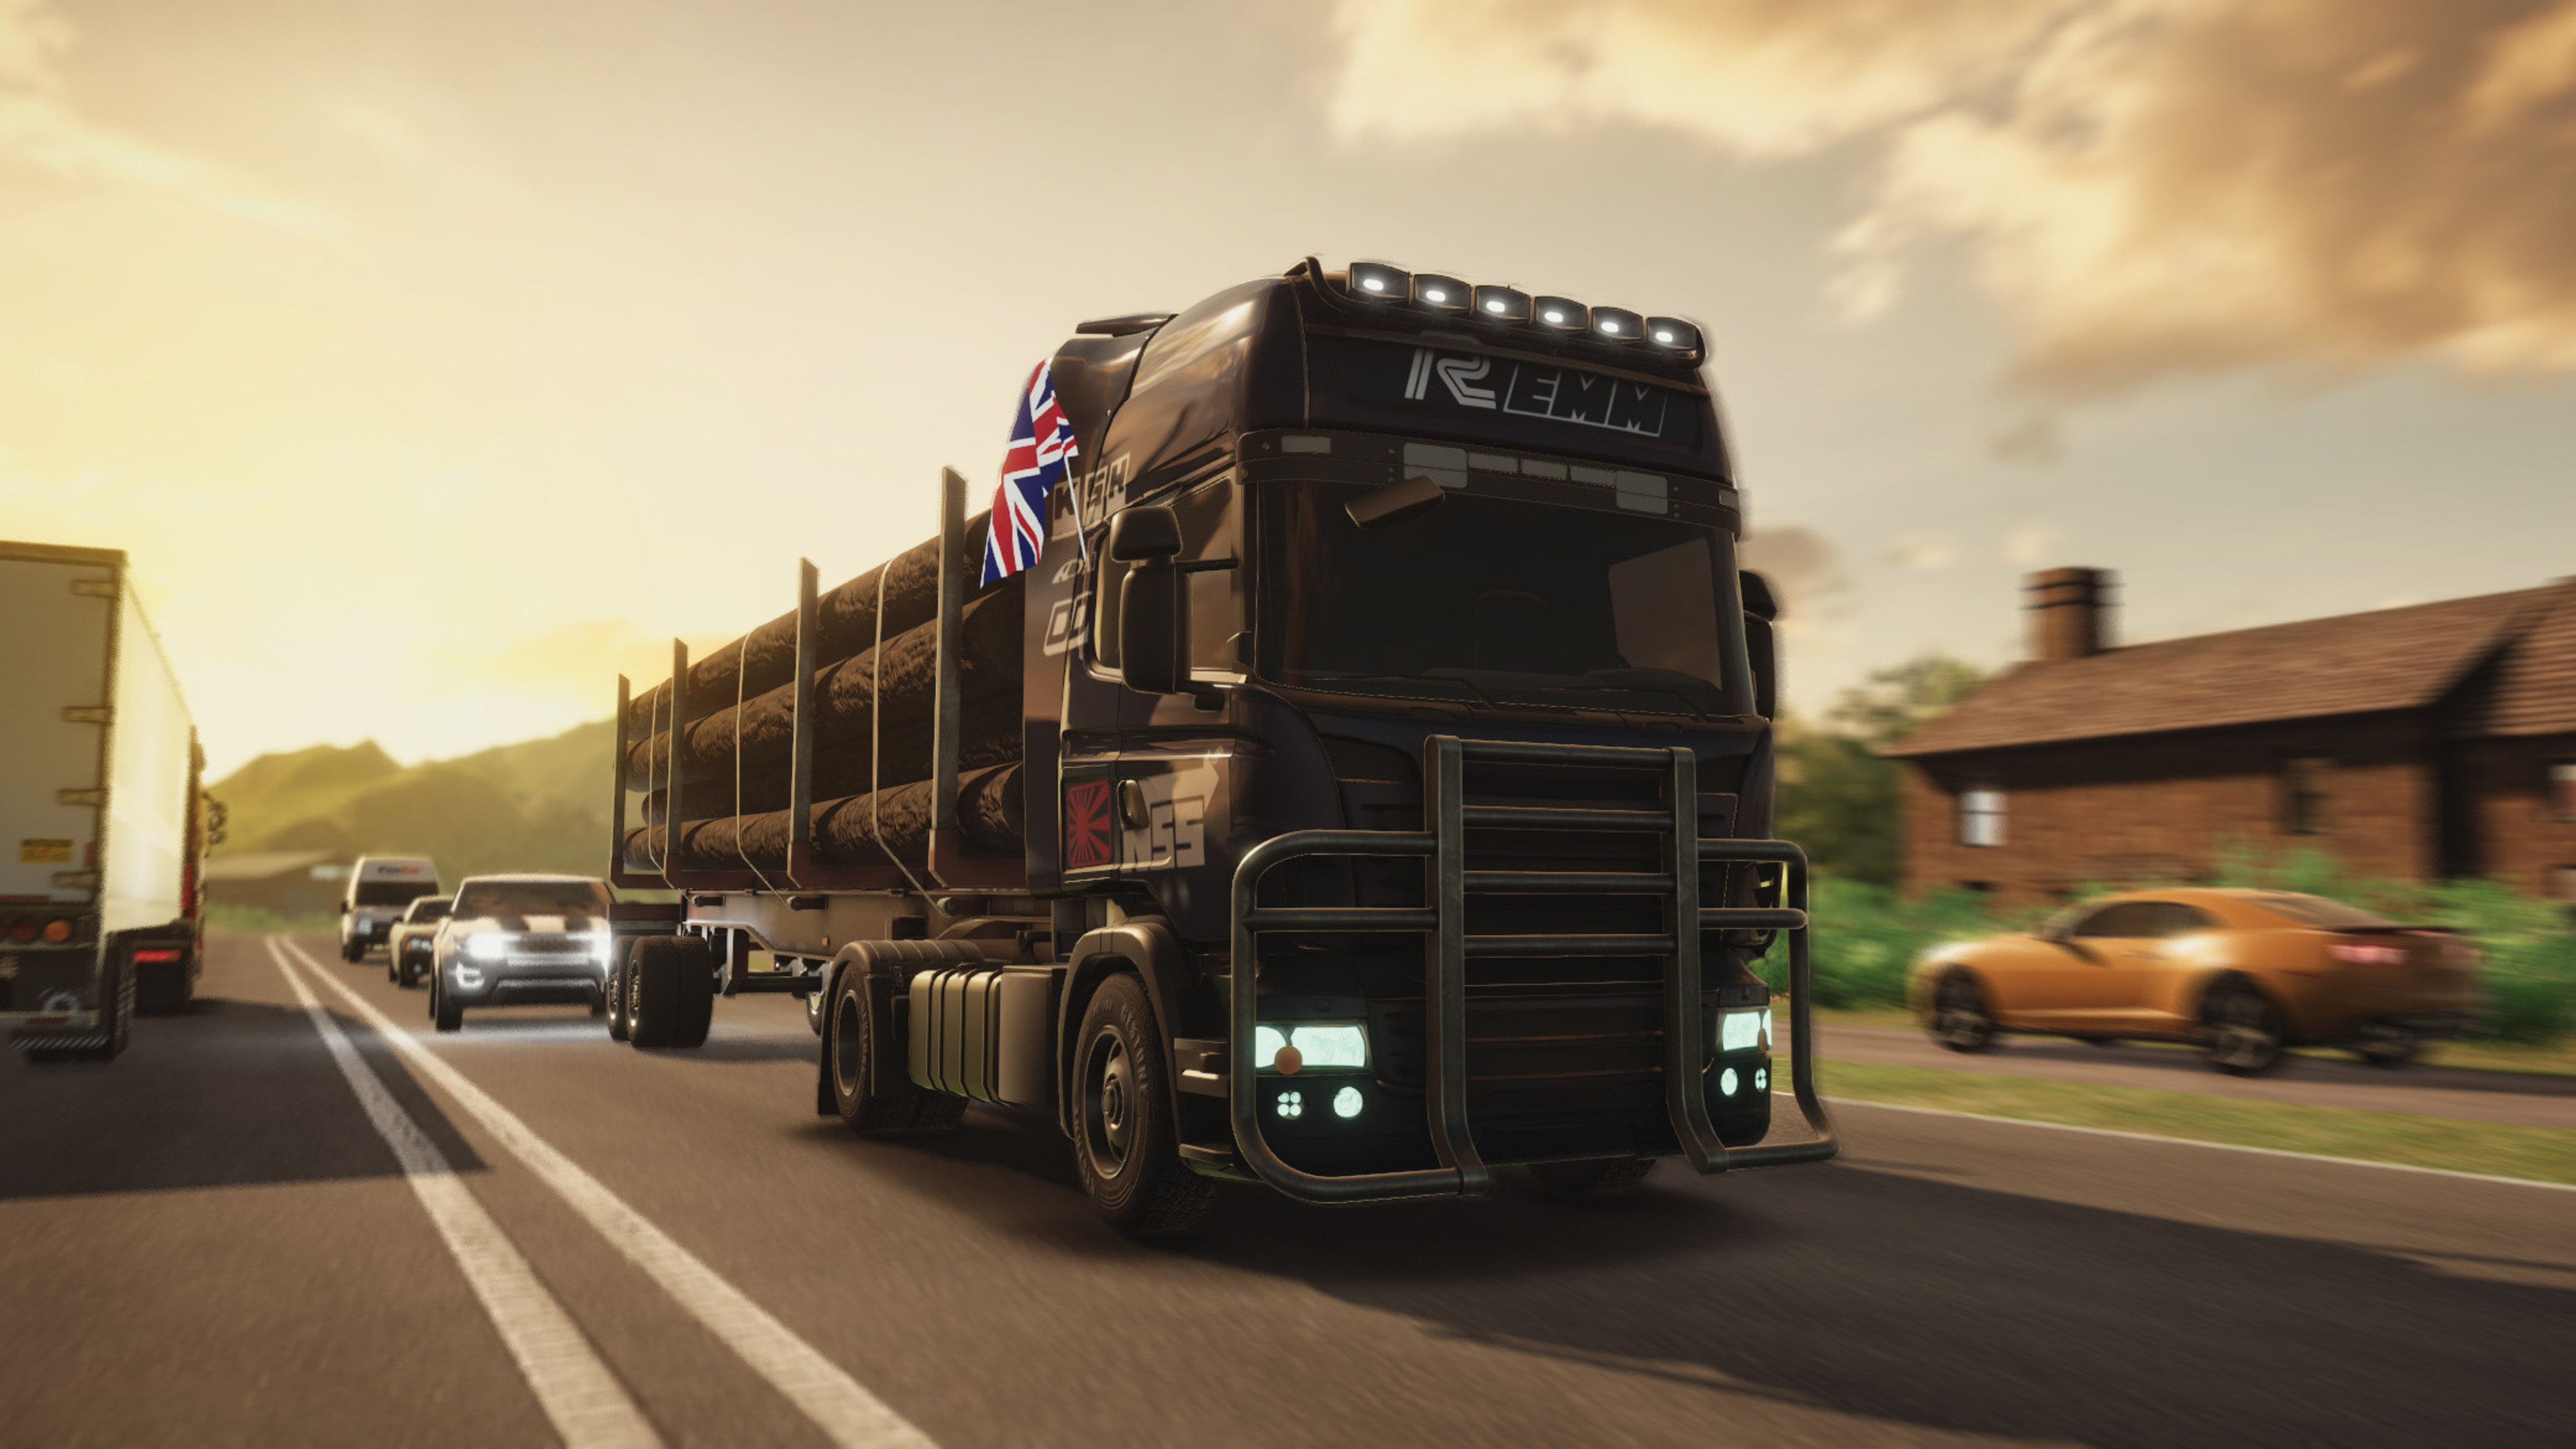 Is Euro Truck Simulator 2 Coming Out on PS4? Release Date News